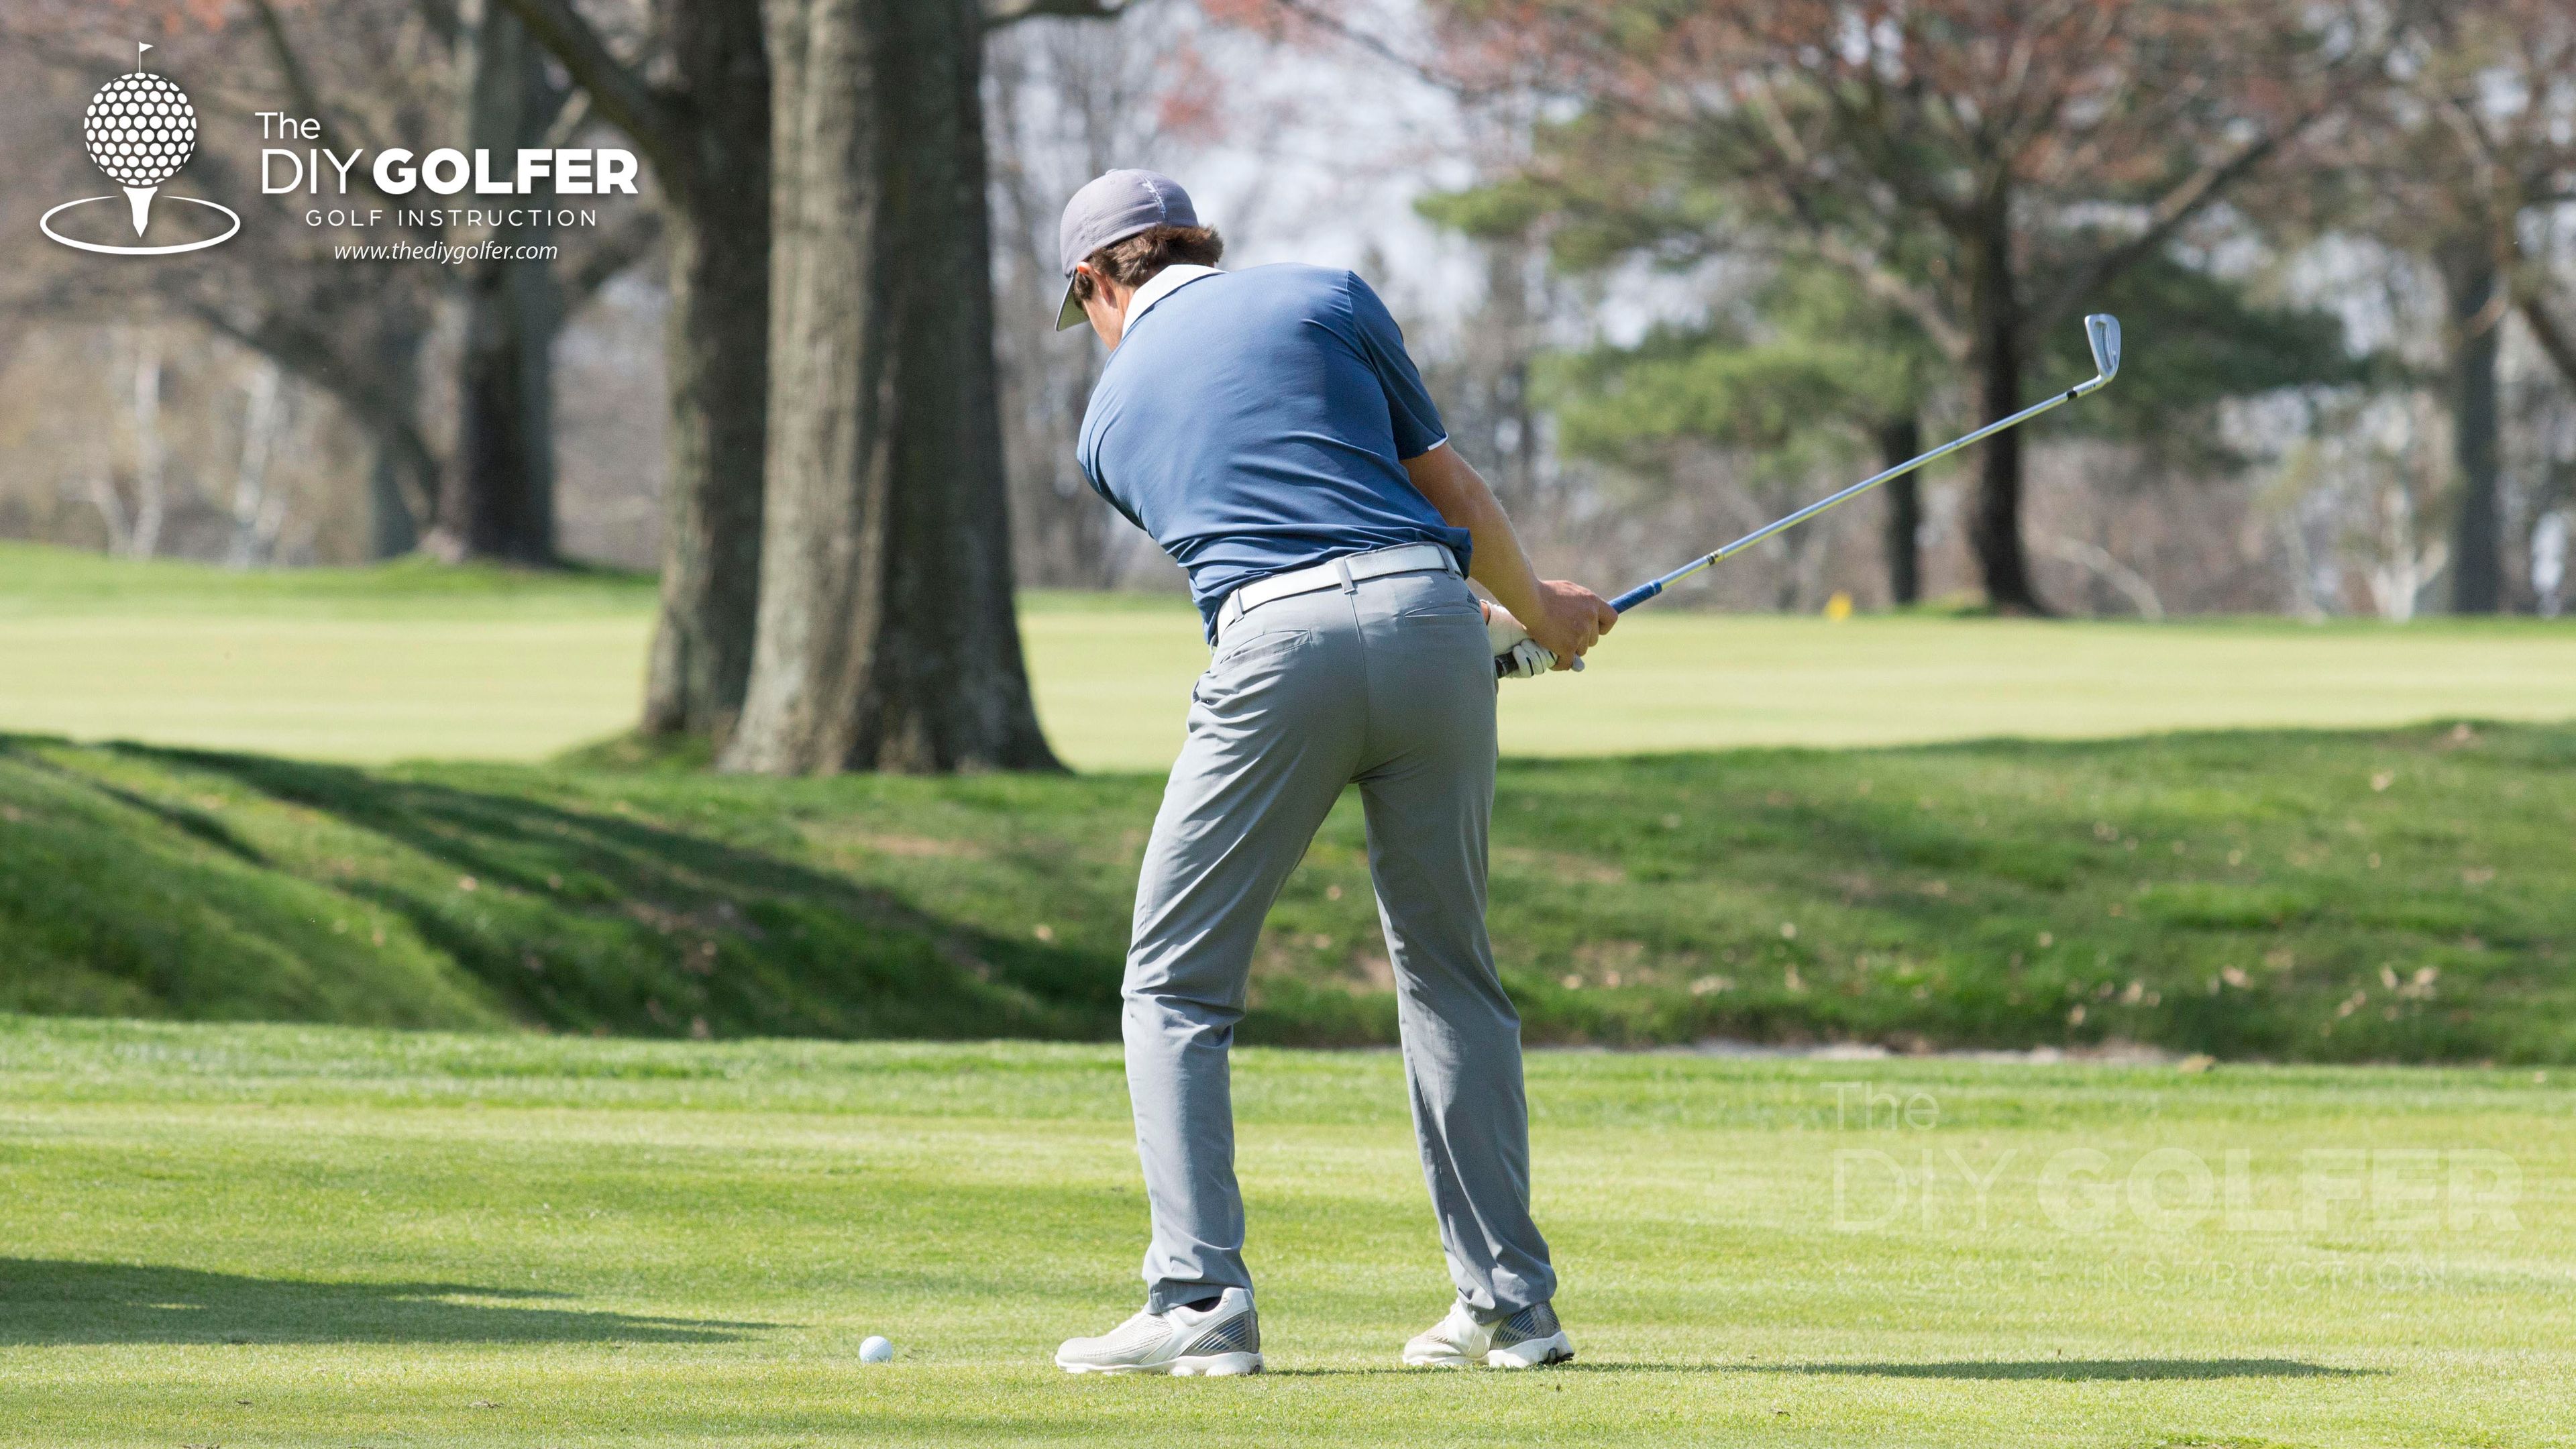 High Definition Golf Swing Photo: Behind Mid Backswing